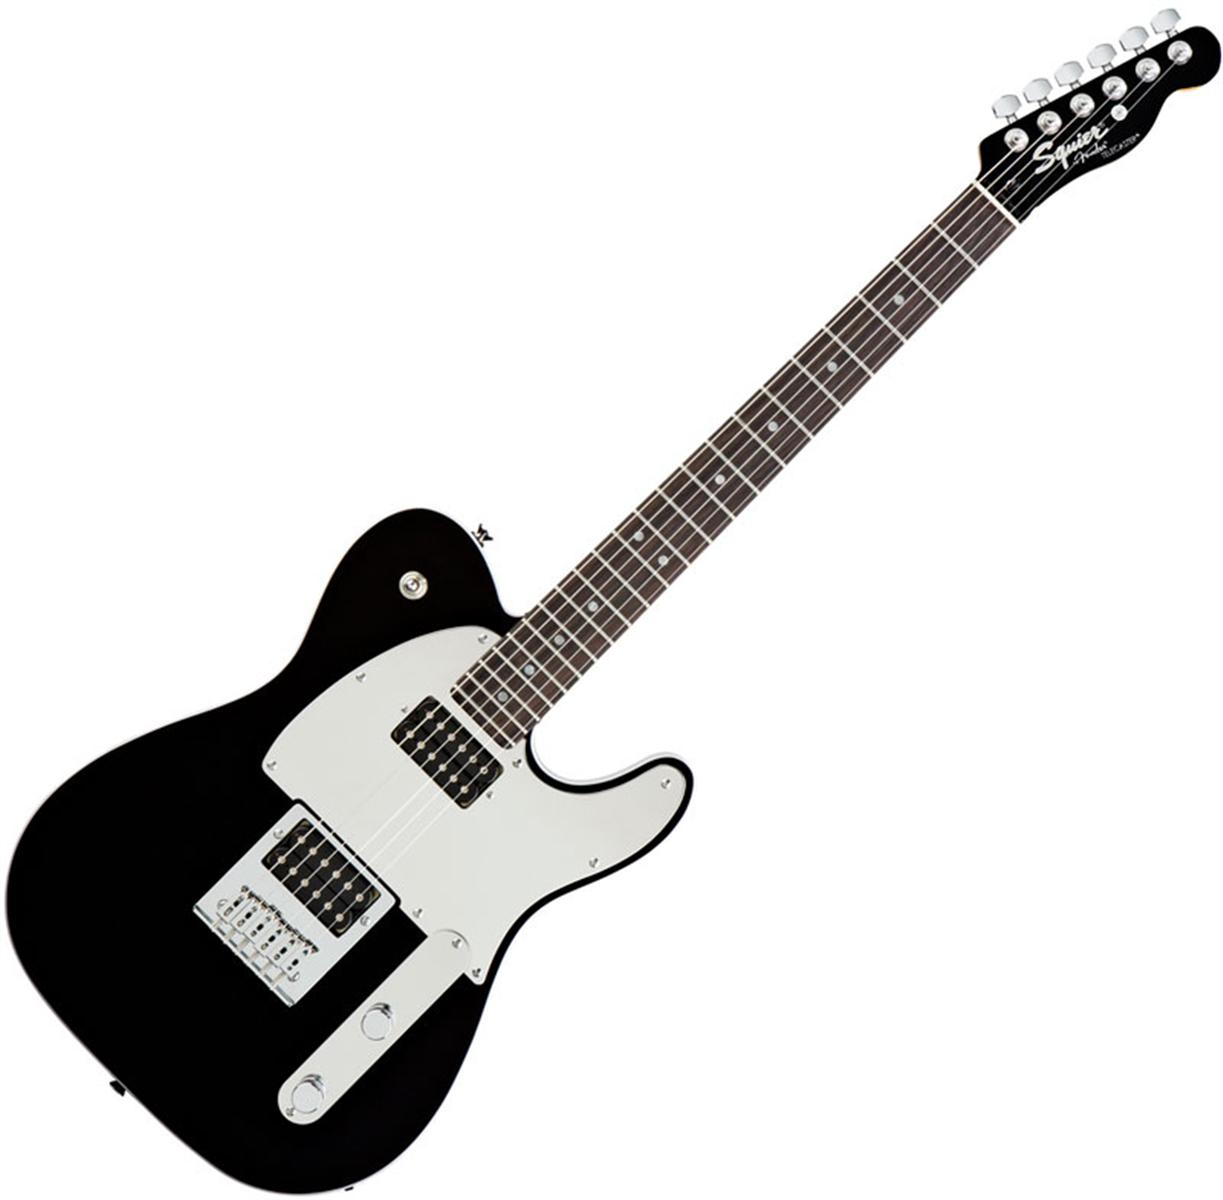 Blue Guitar Clipart Products2 - Electric Guitar Clipart